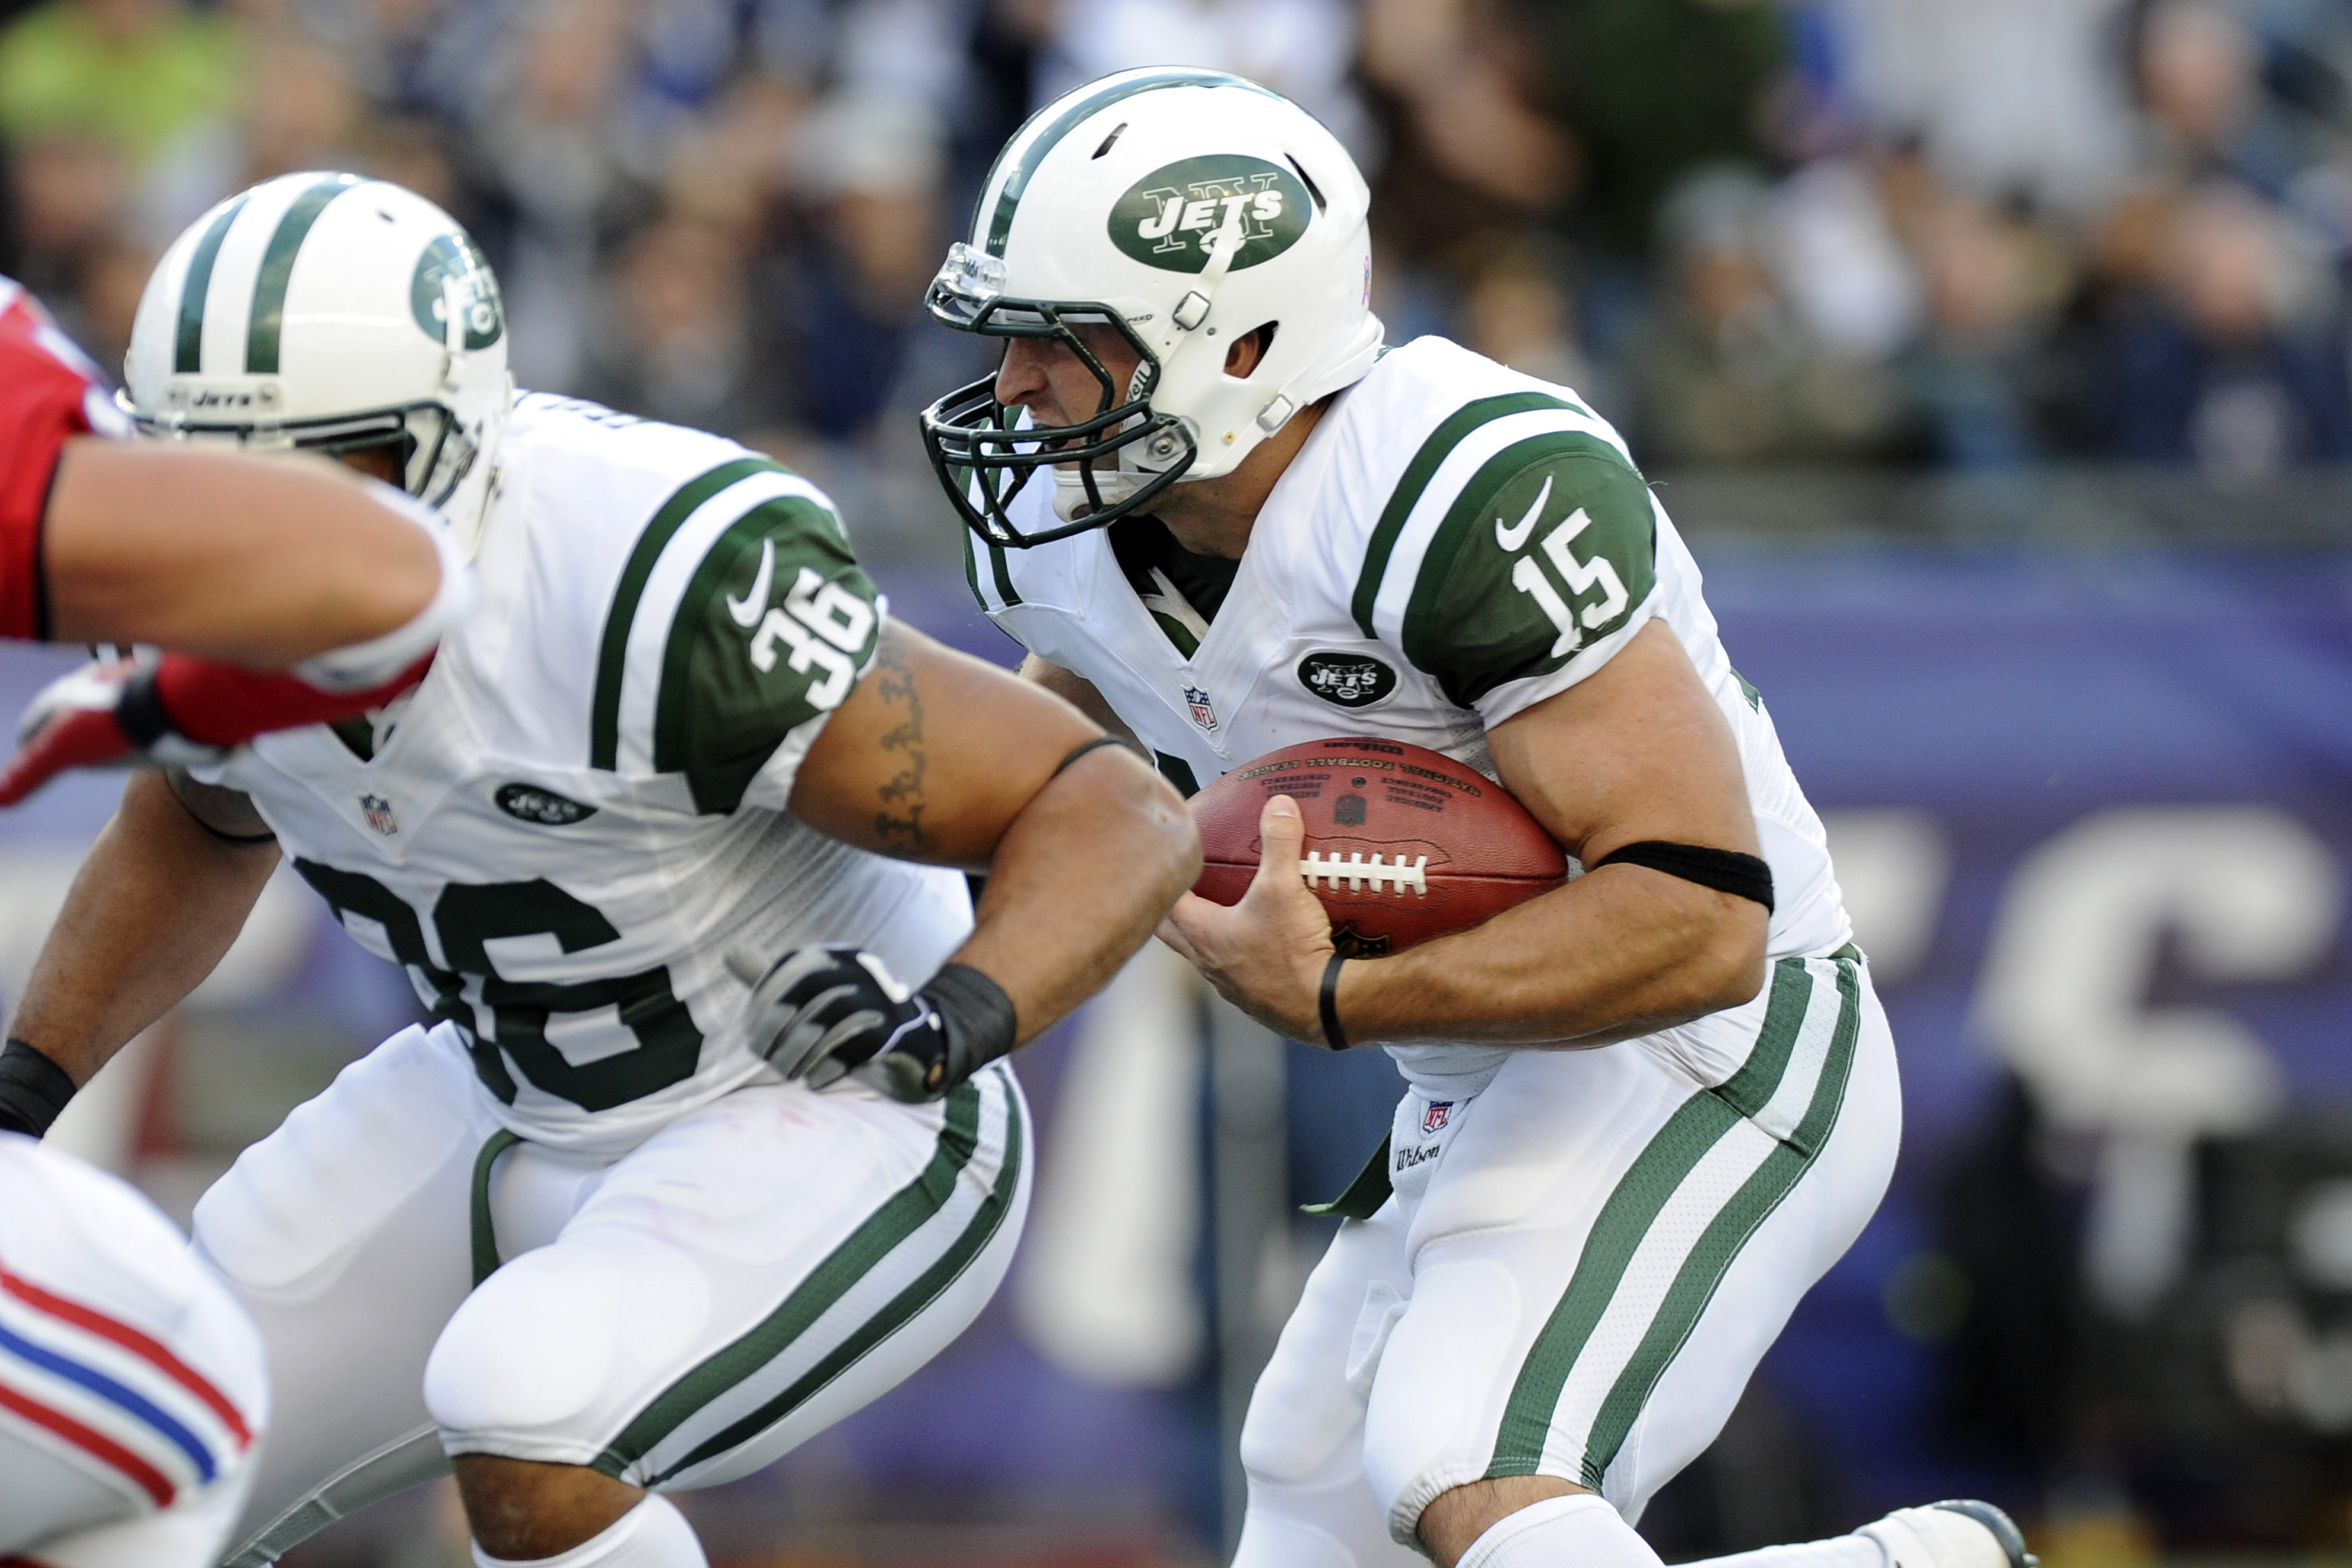 October 21, 2012; Foxboro, MA USA; New York Jets quarterback Tim Tebow (15) runs with the ball during the first quarter against the New England Patriots at Gillette Stadium. Mandatory Credit: Bob DeChiara-US PRESSWIRE ORG XMIT: USPW-81936 ORIG FILE ID: 20121021_jrc_ad7_166.JPG